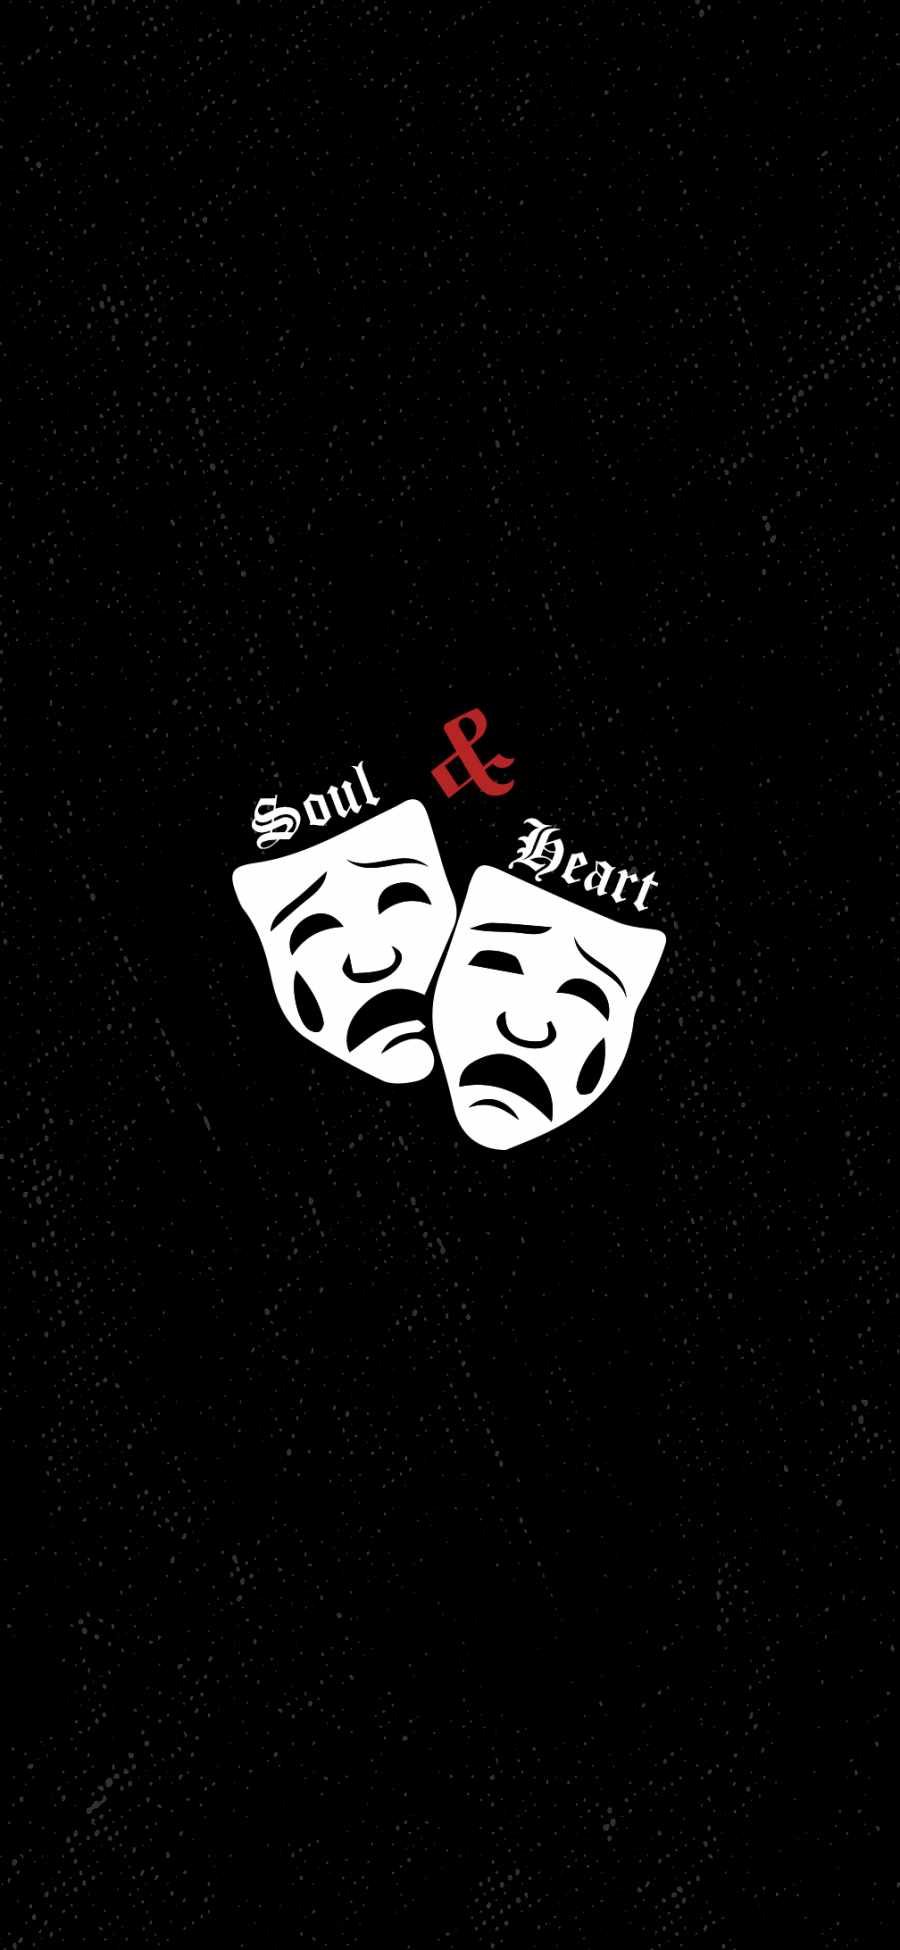 Soul and Heart HD iPhone Wallpaper